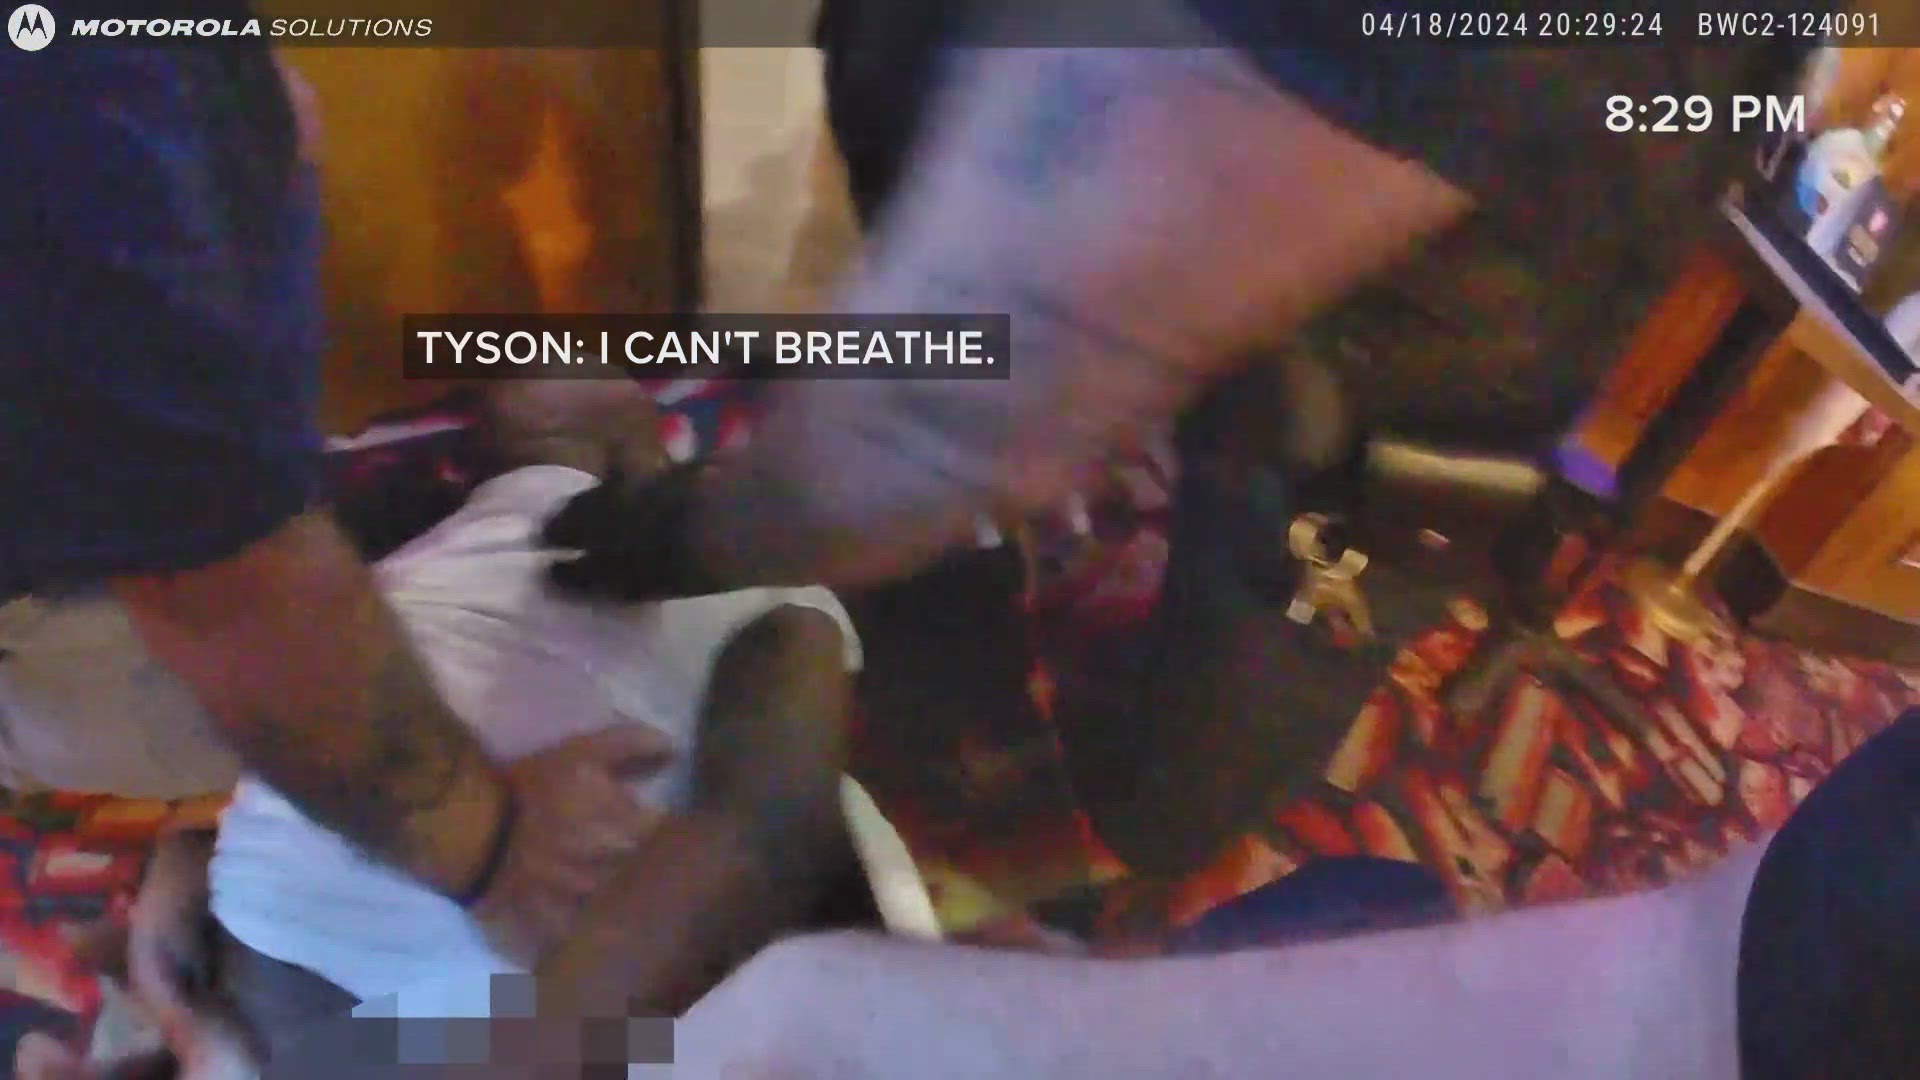 An officer can be seen placing his knee on Frank Tyson's upper body for roughly 30 seconds. More than five minutes passed before police checked Tyson for a pulse.